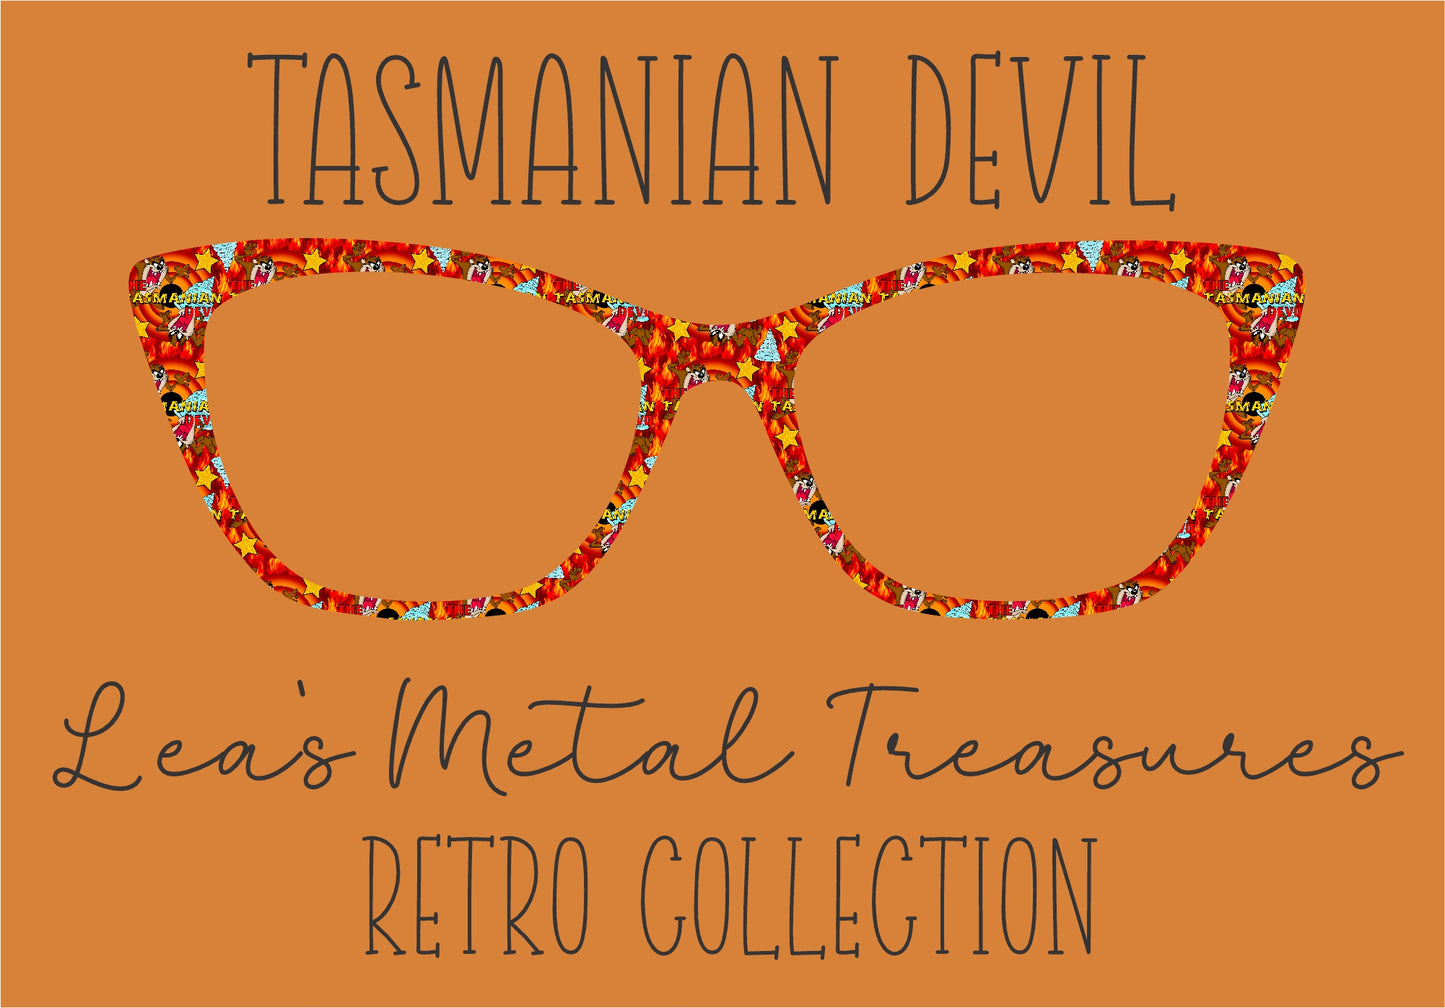 TASMANIAN DEVIL Eyewear Frame Toppers COMES WITH MAGNETS